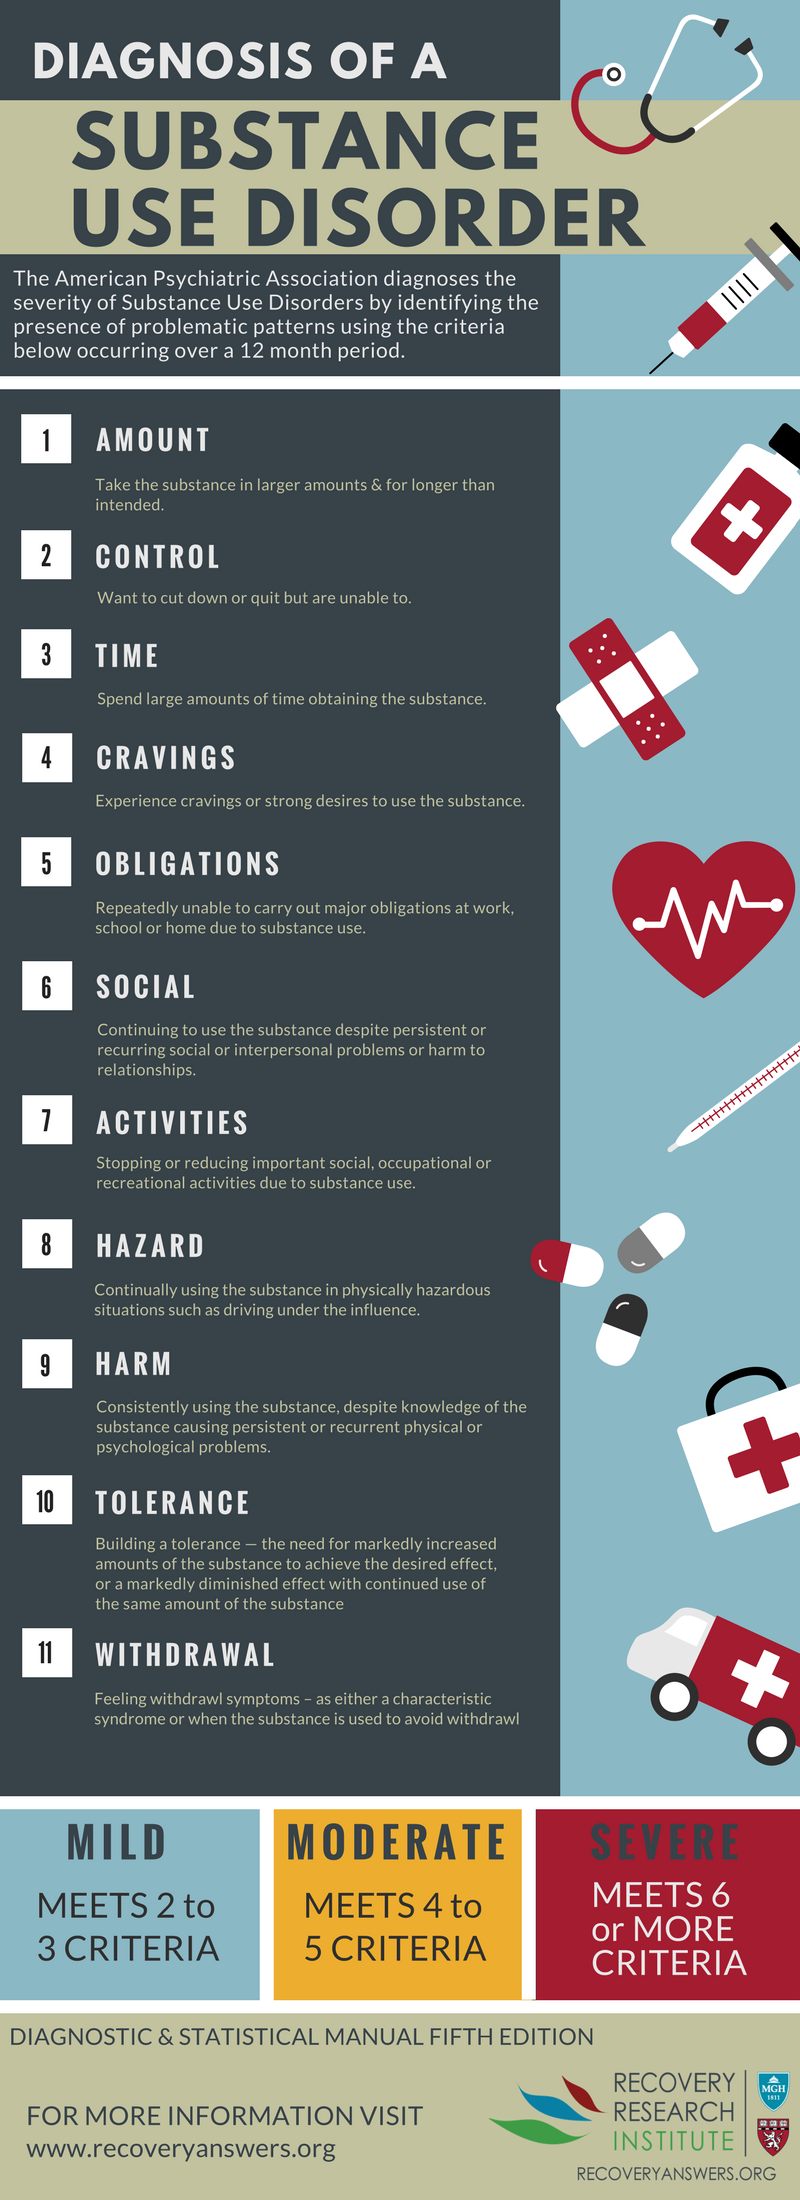 Addiction Diagnosis Research Infographic